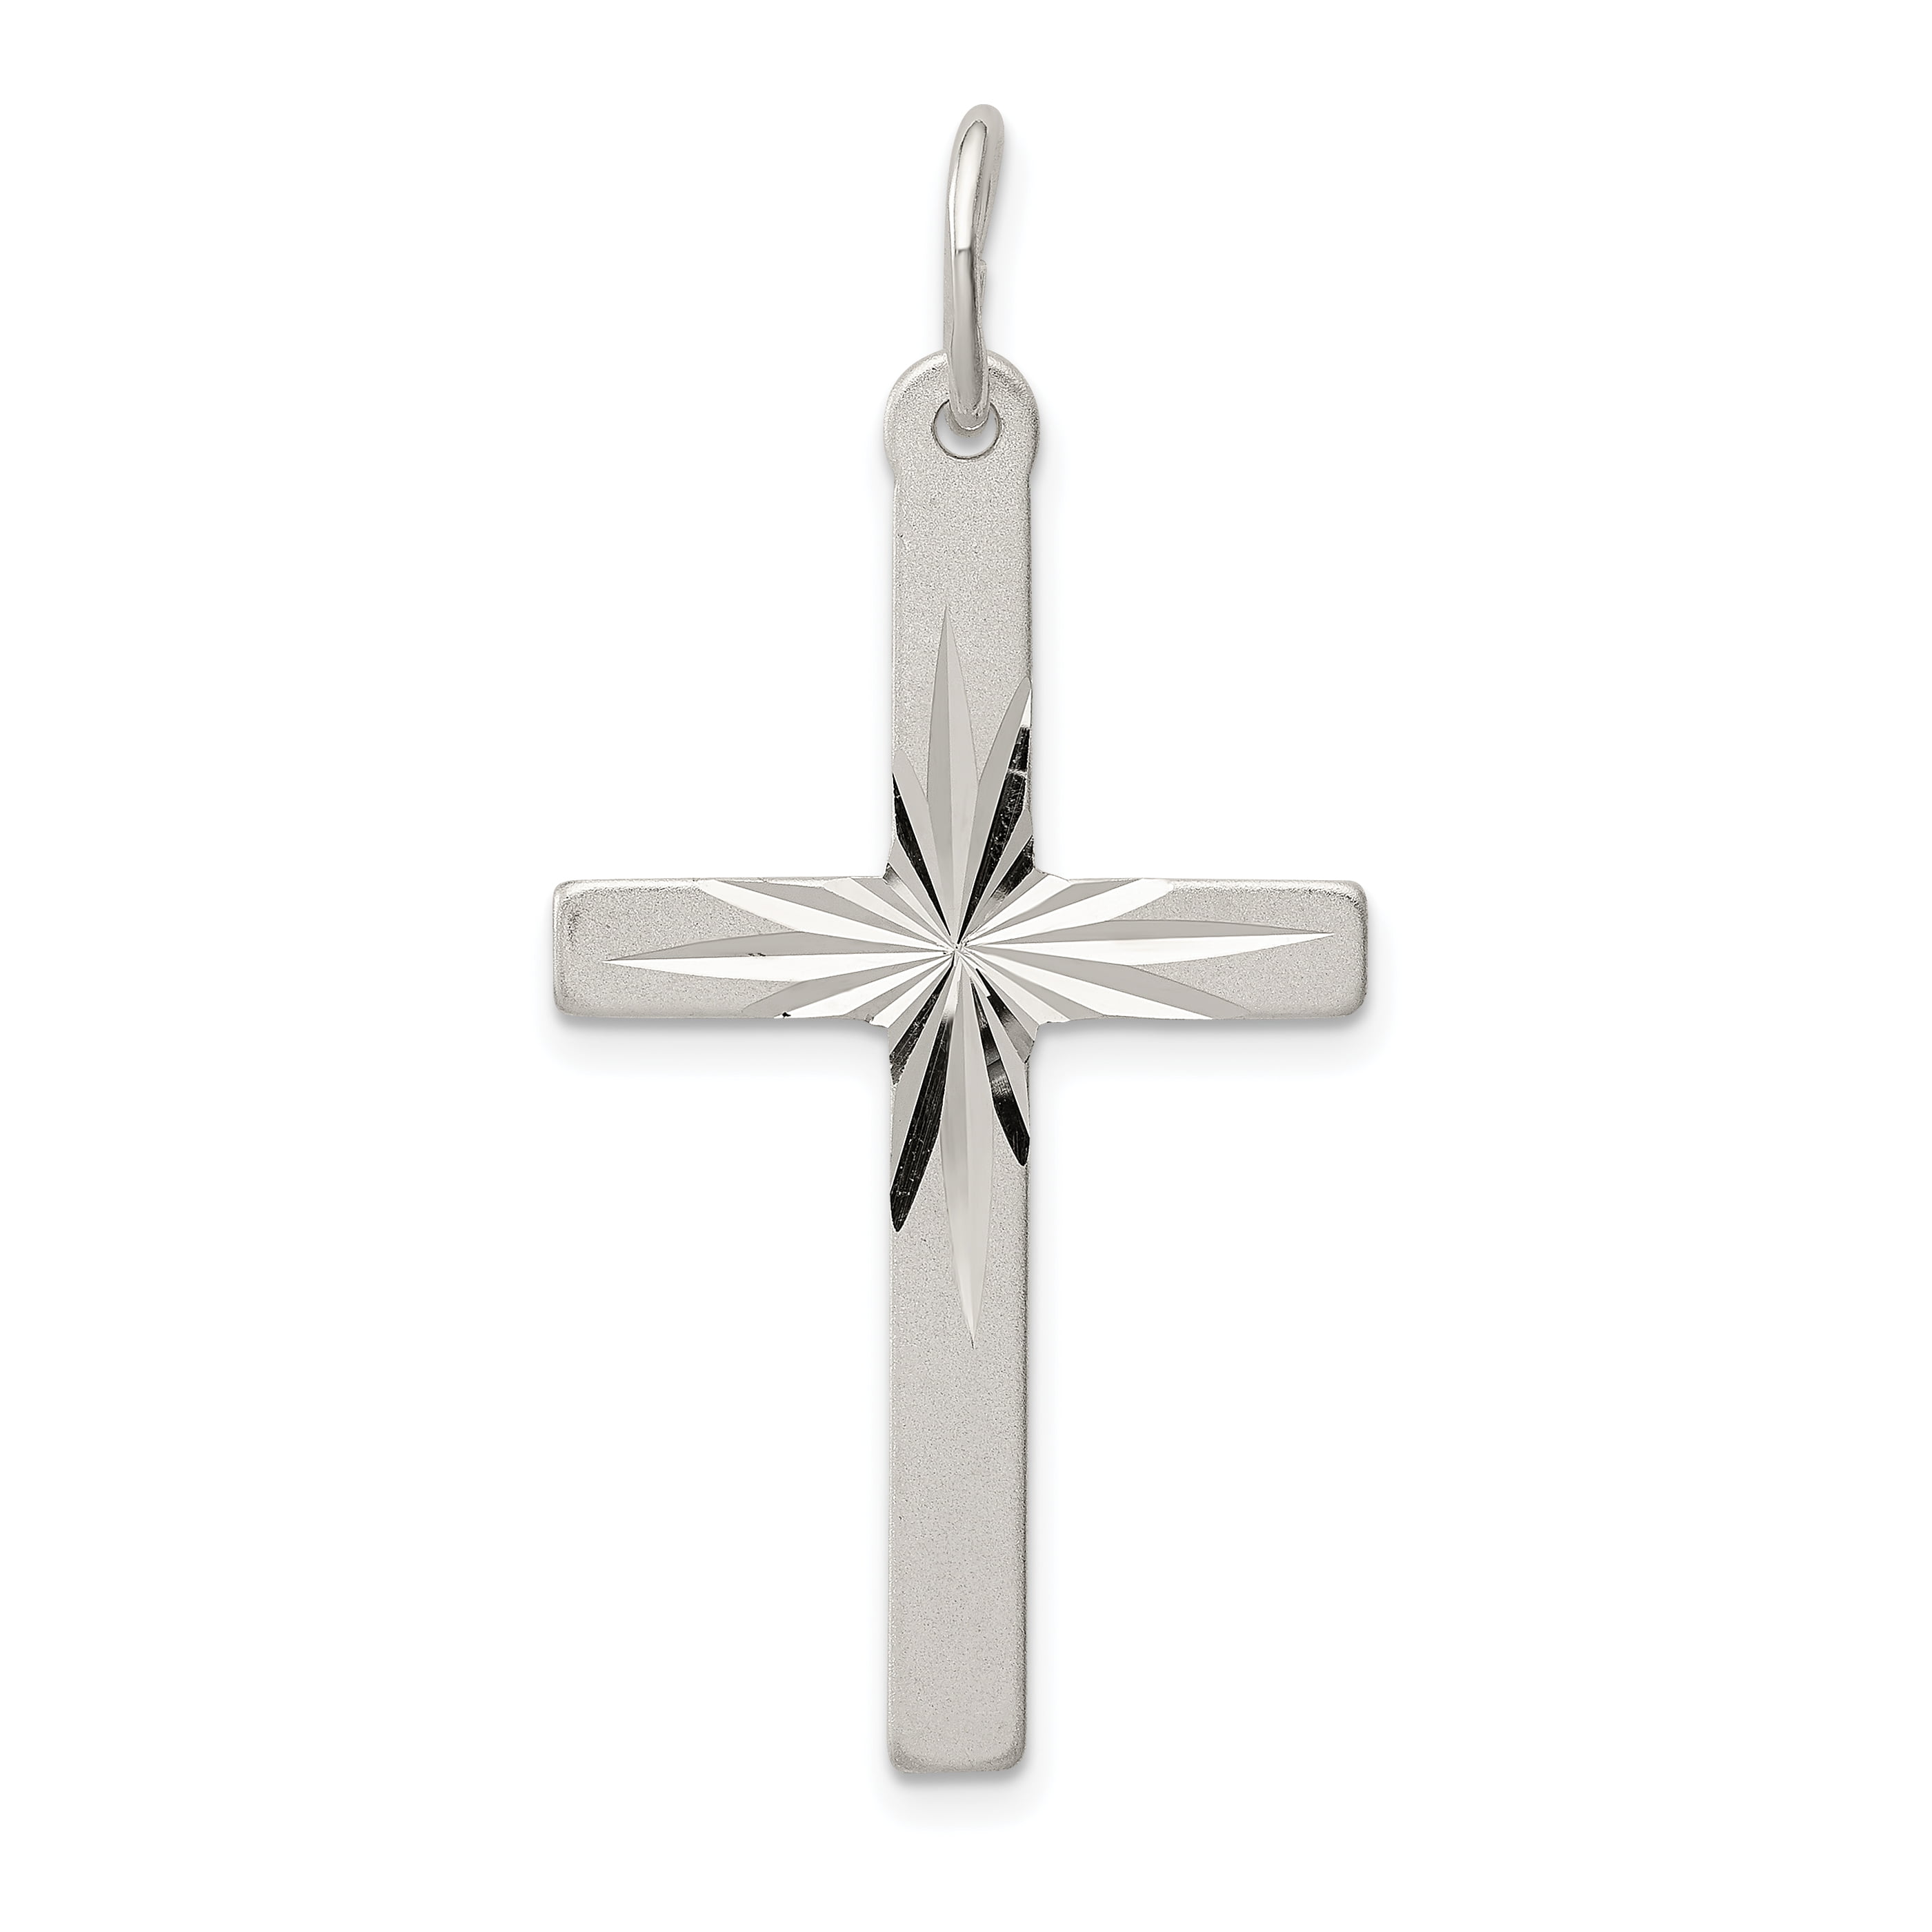 925 Sterling Silver Polished Antiqued Cross Charm Pendant 31mm x 20mm